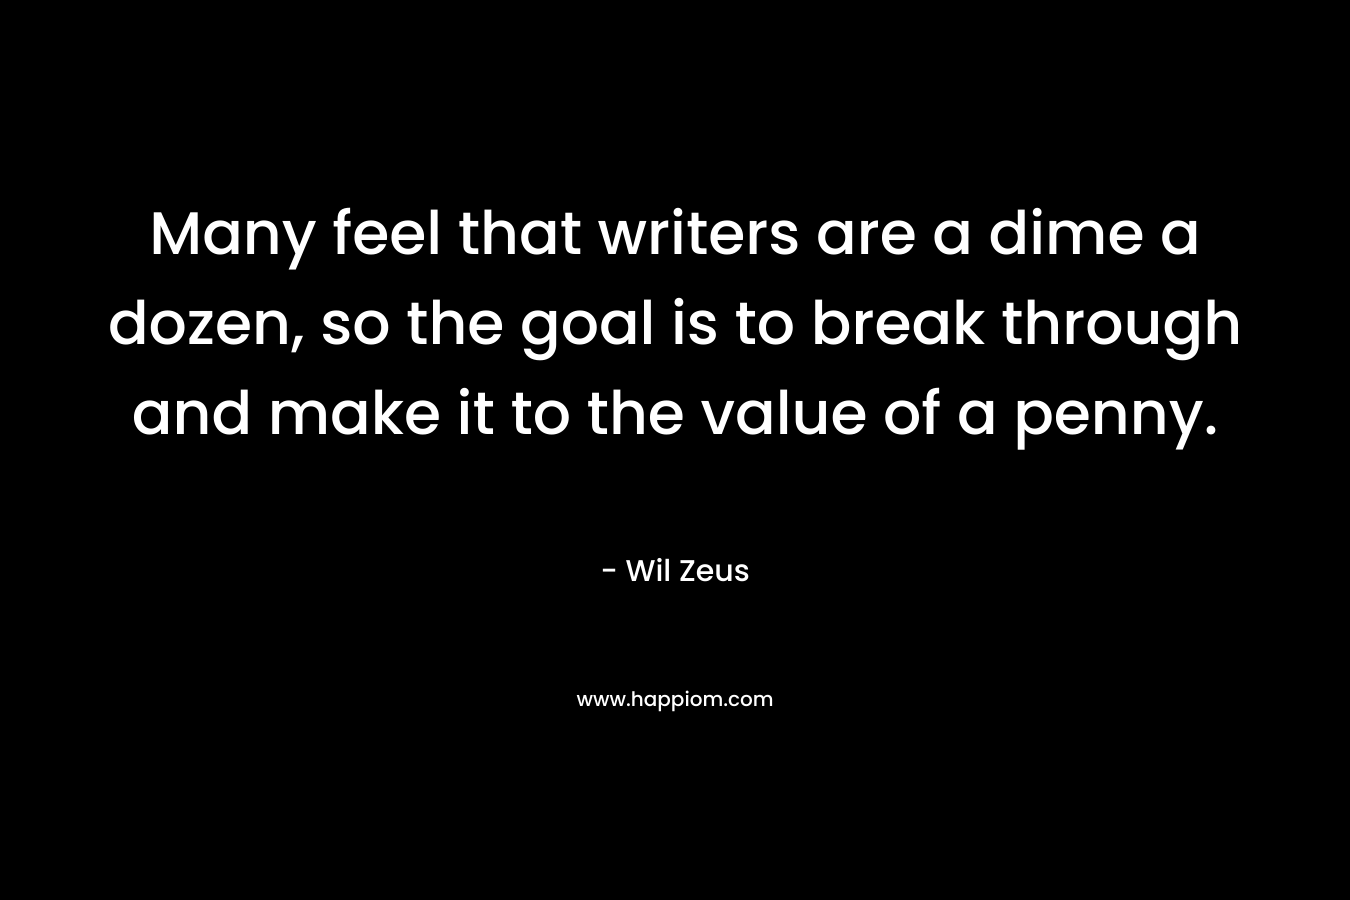 Many feel that writers are a dime a dozen, so the goal is to break through and make it to the value of a penny. – Wil Zeus